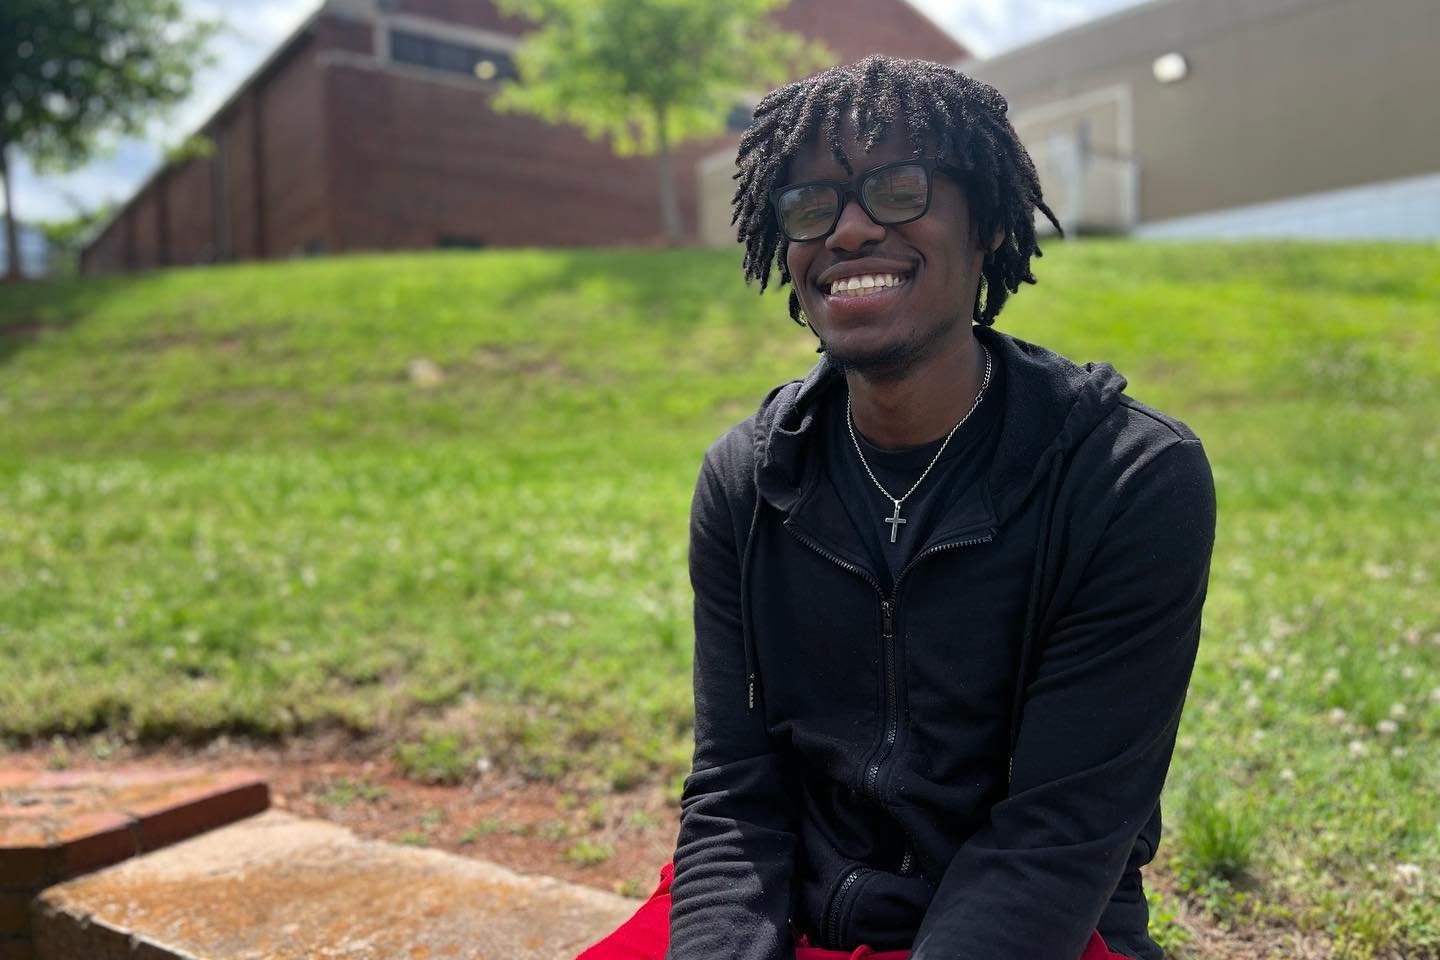 Clarke Central High School senior Zadon Bacon poses outside of CCHS on May 10. With a background in sports, acting wasn&rsquo;t an active passion in Bacon&rsquo;s life. &ldquo;I always wanted to be an actor when I was a kid but fell into doing sports